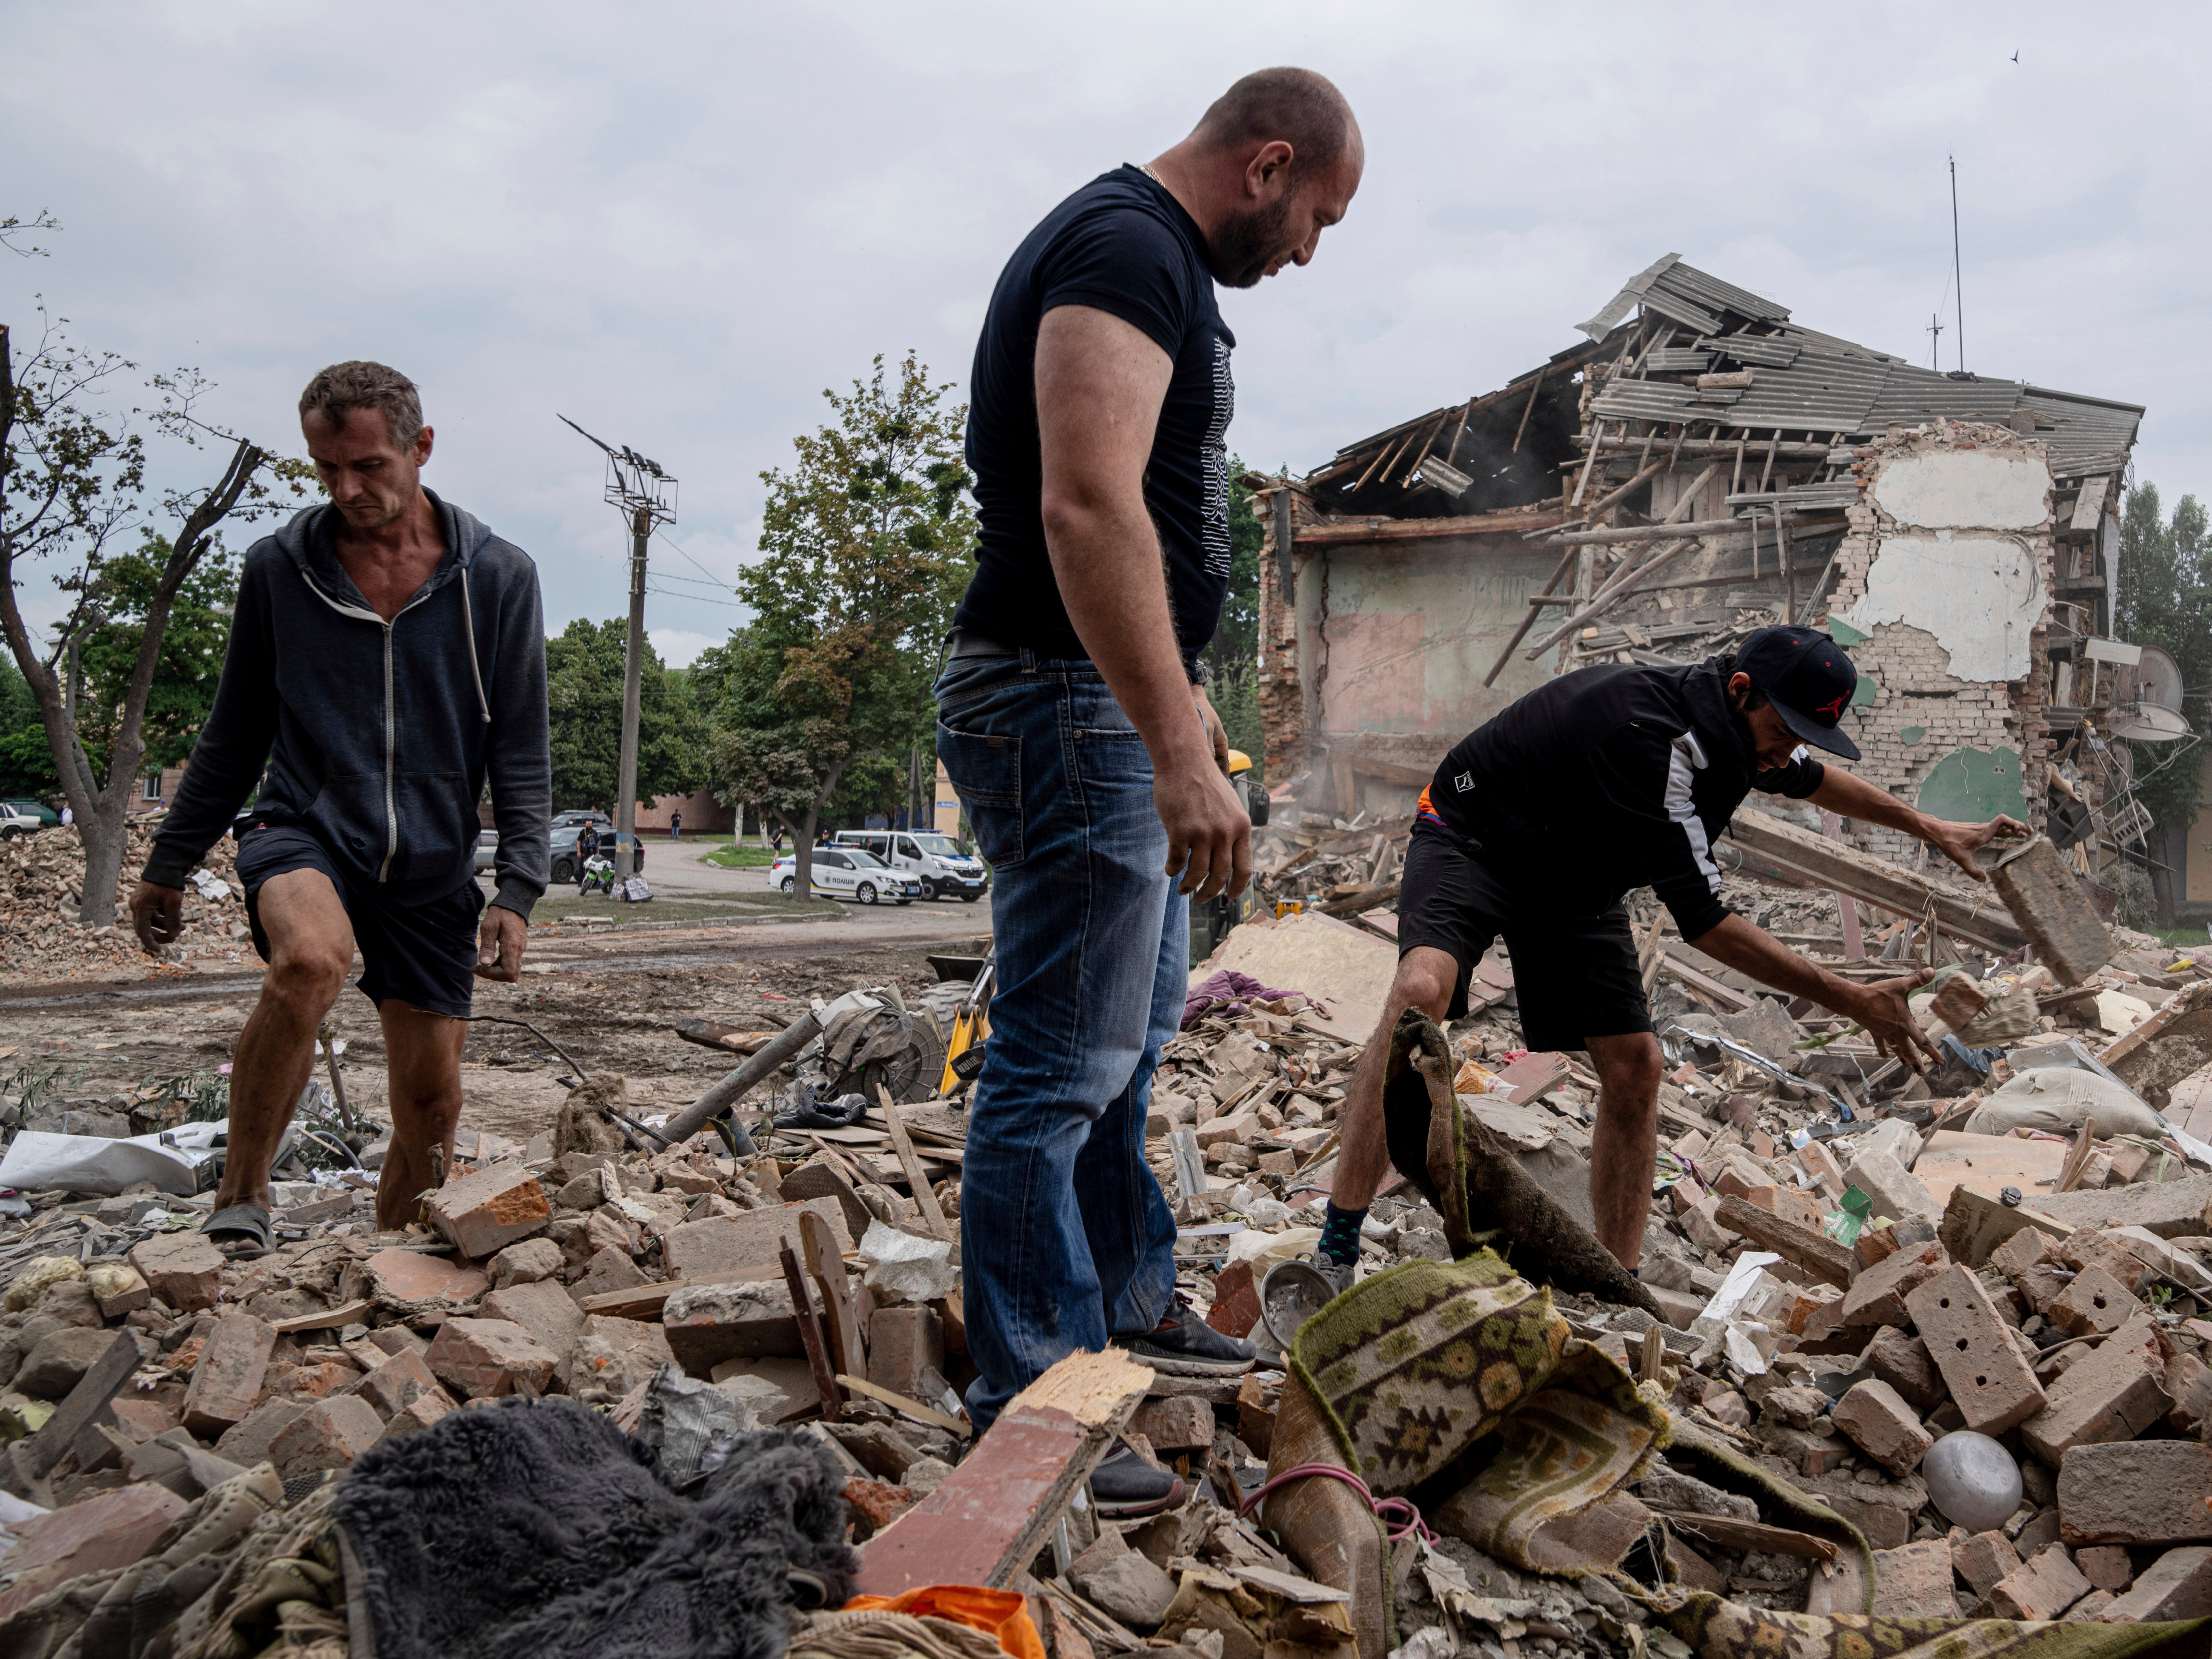 Local residents search for documents of their injured friend in the debris of a destroyed apartment house after Russian shelling in a residential area in Chuhuiv